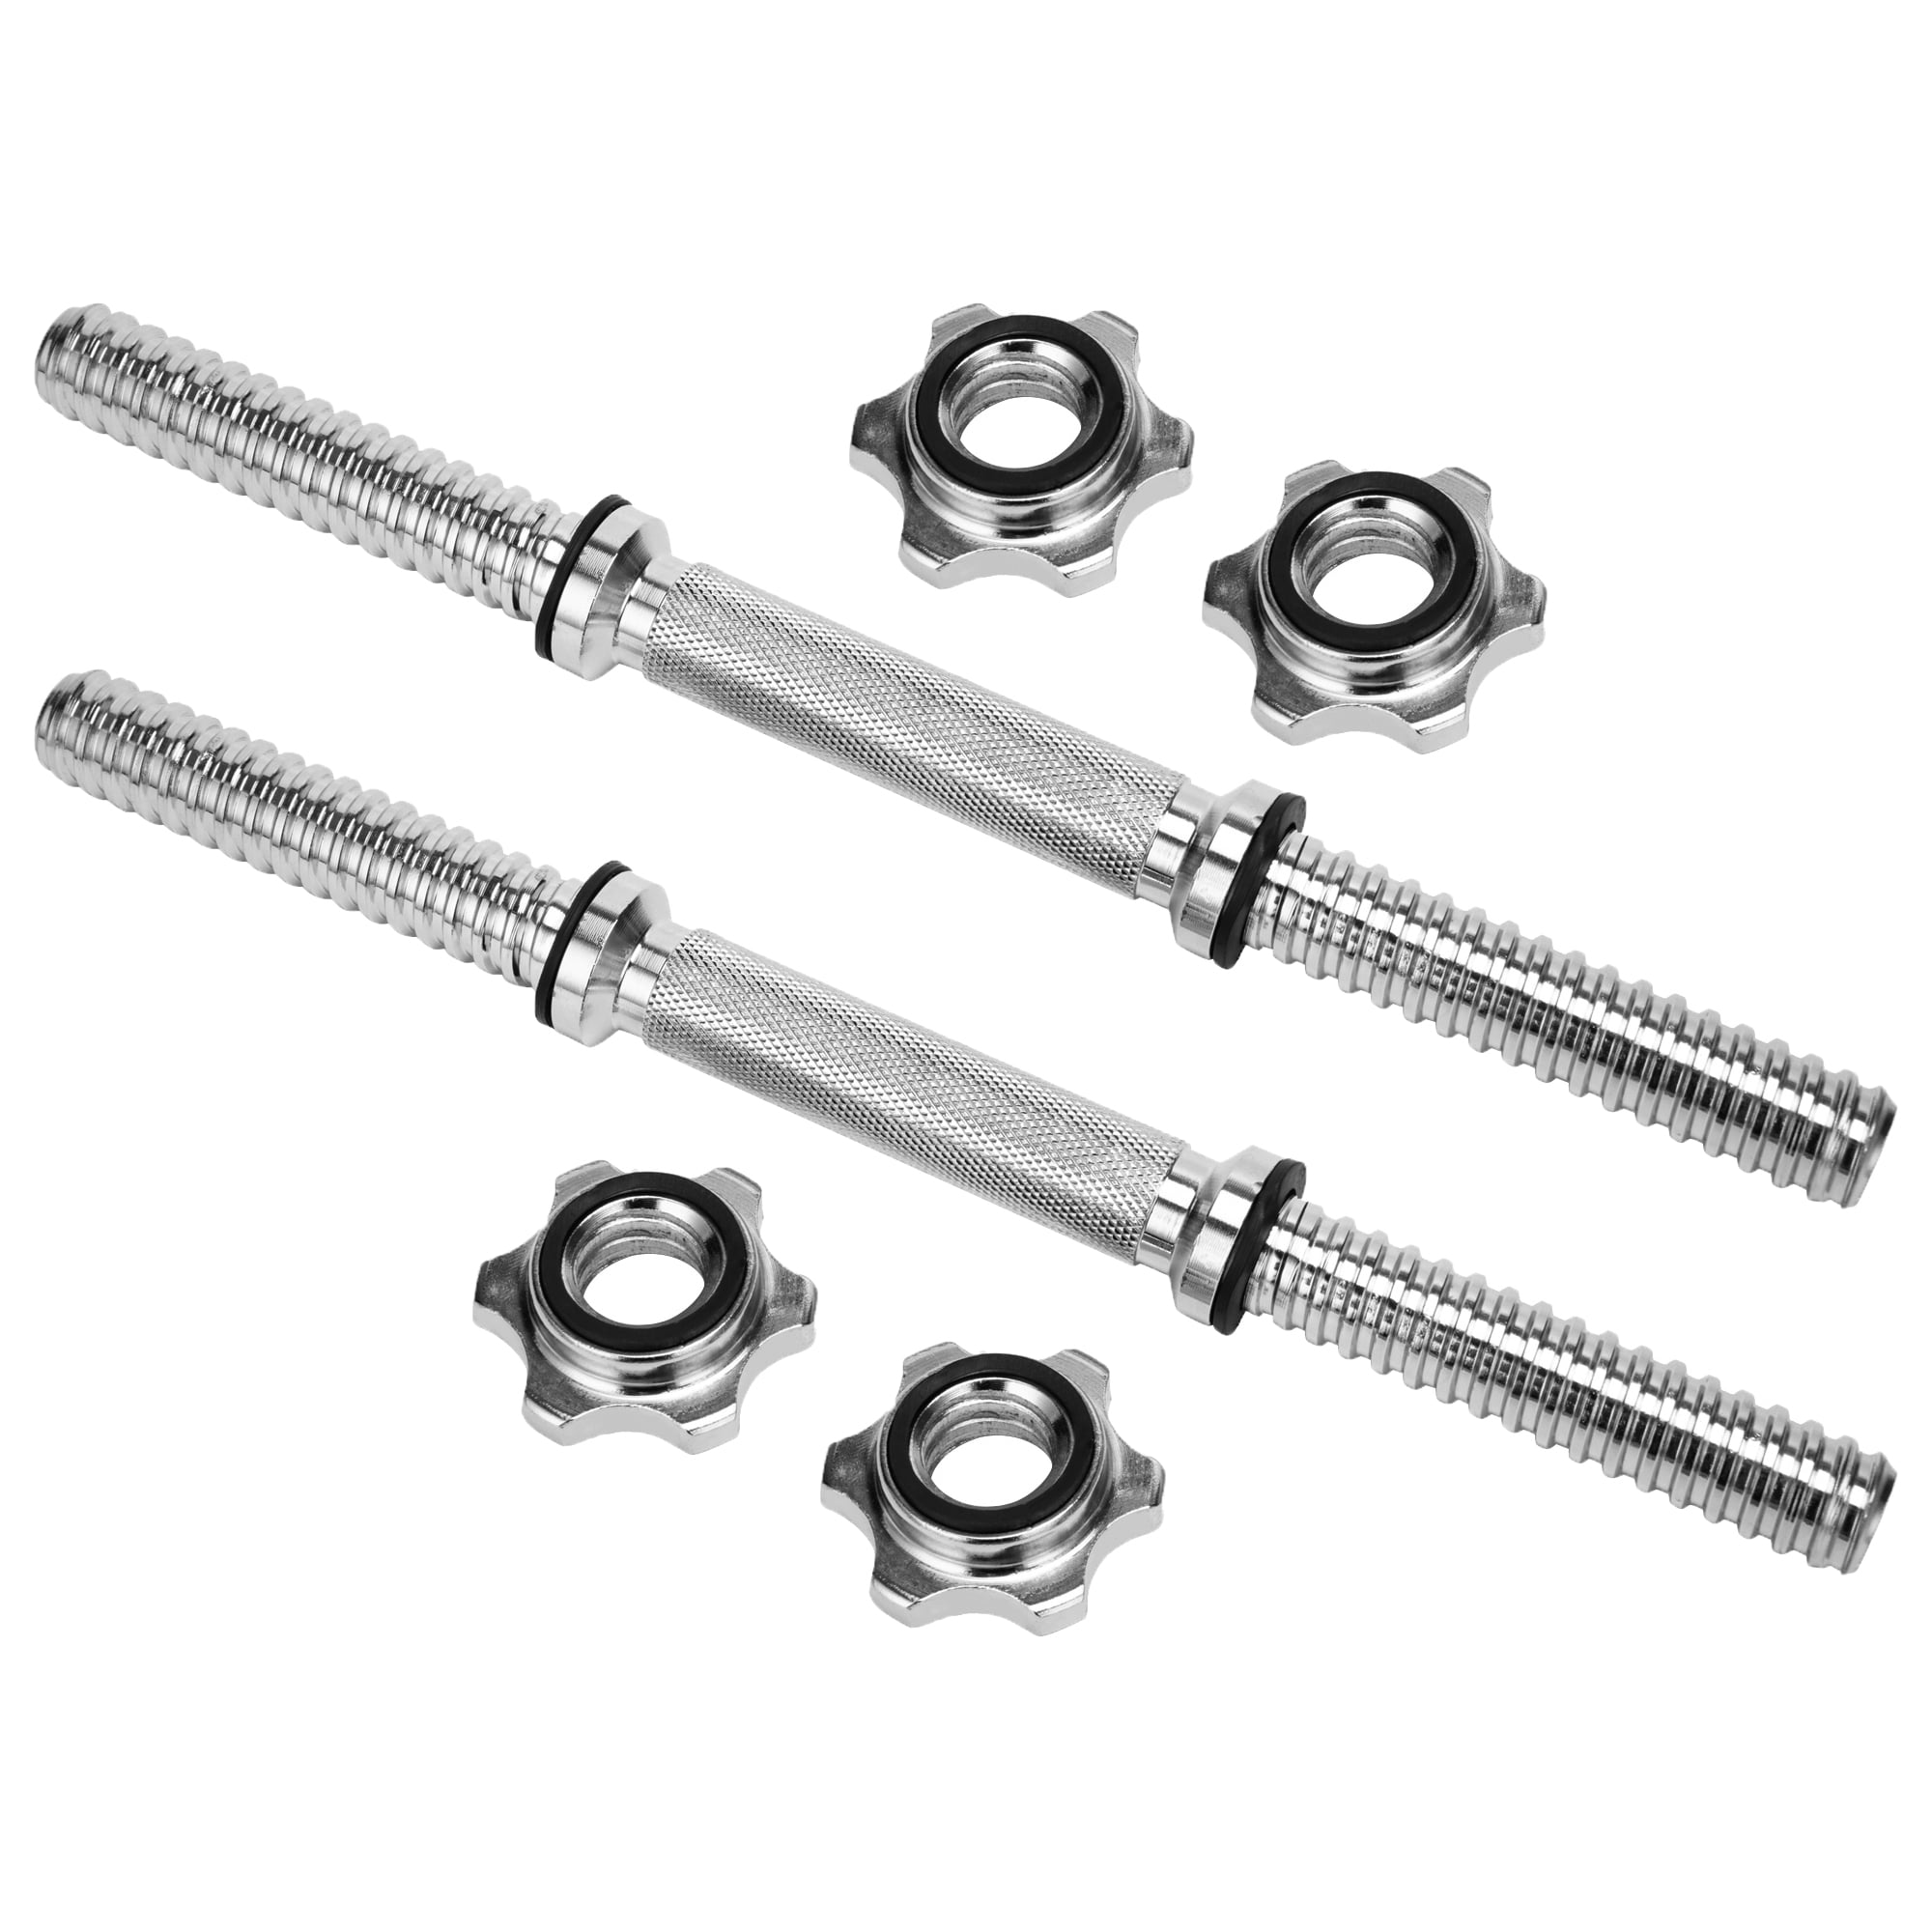 1X Weight Lifting Dumbbell Rod Bar Buckle Supply Collars Barbell Safety Lock Fun